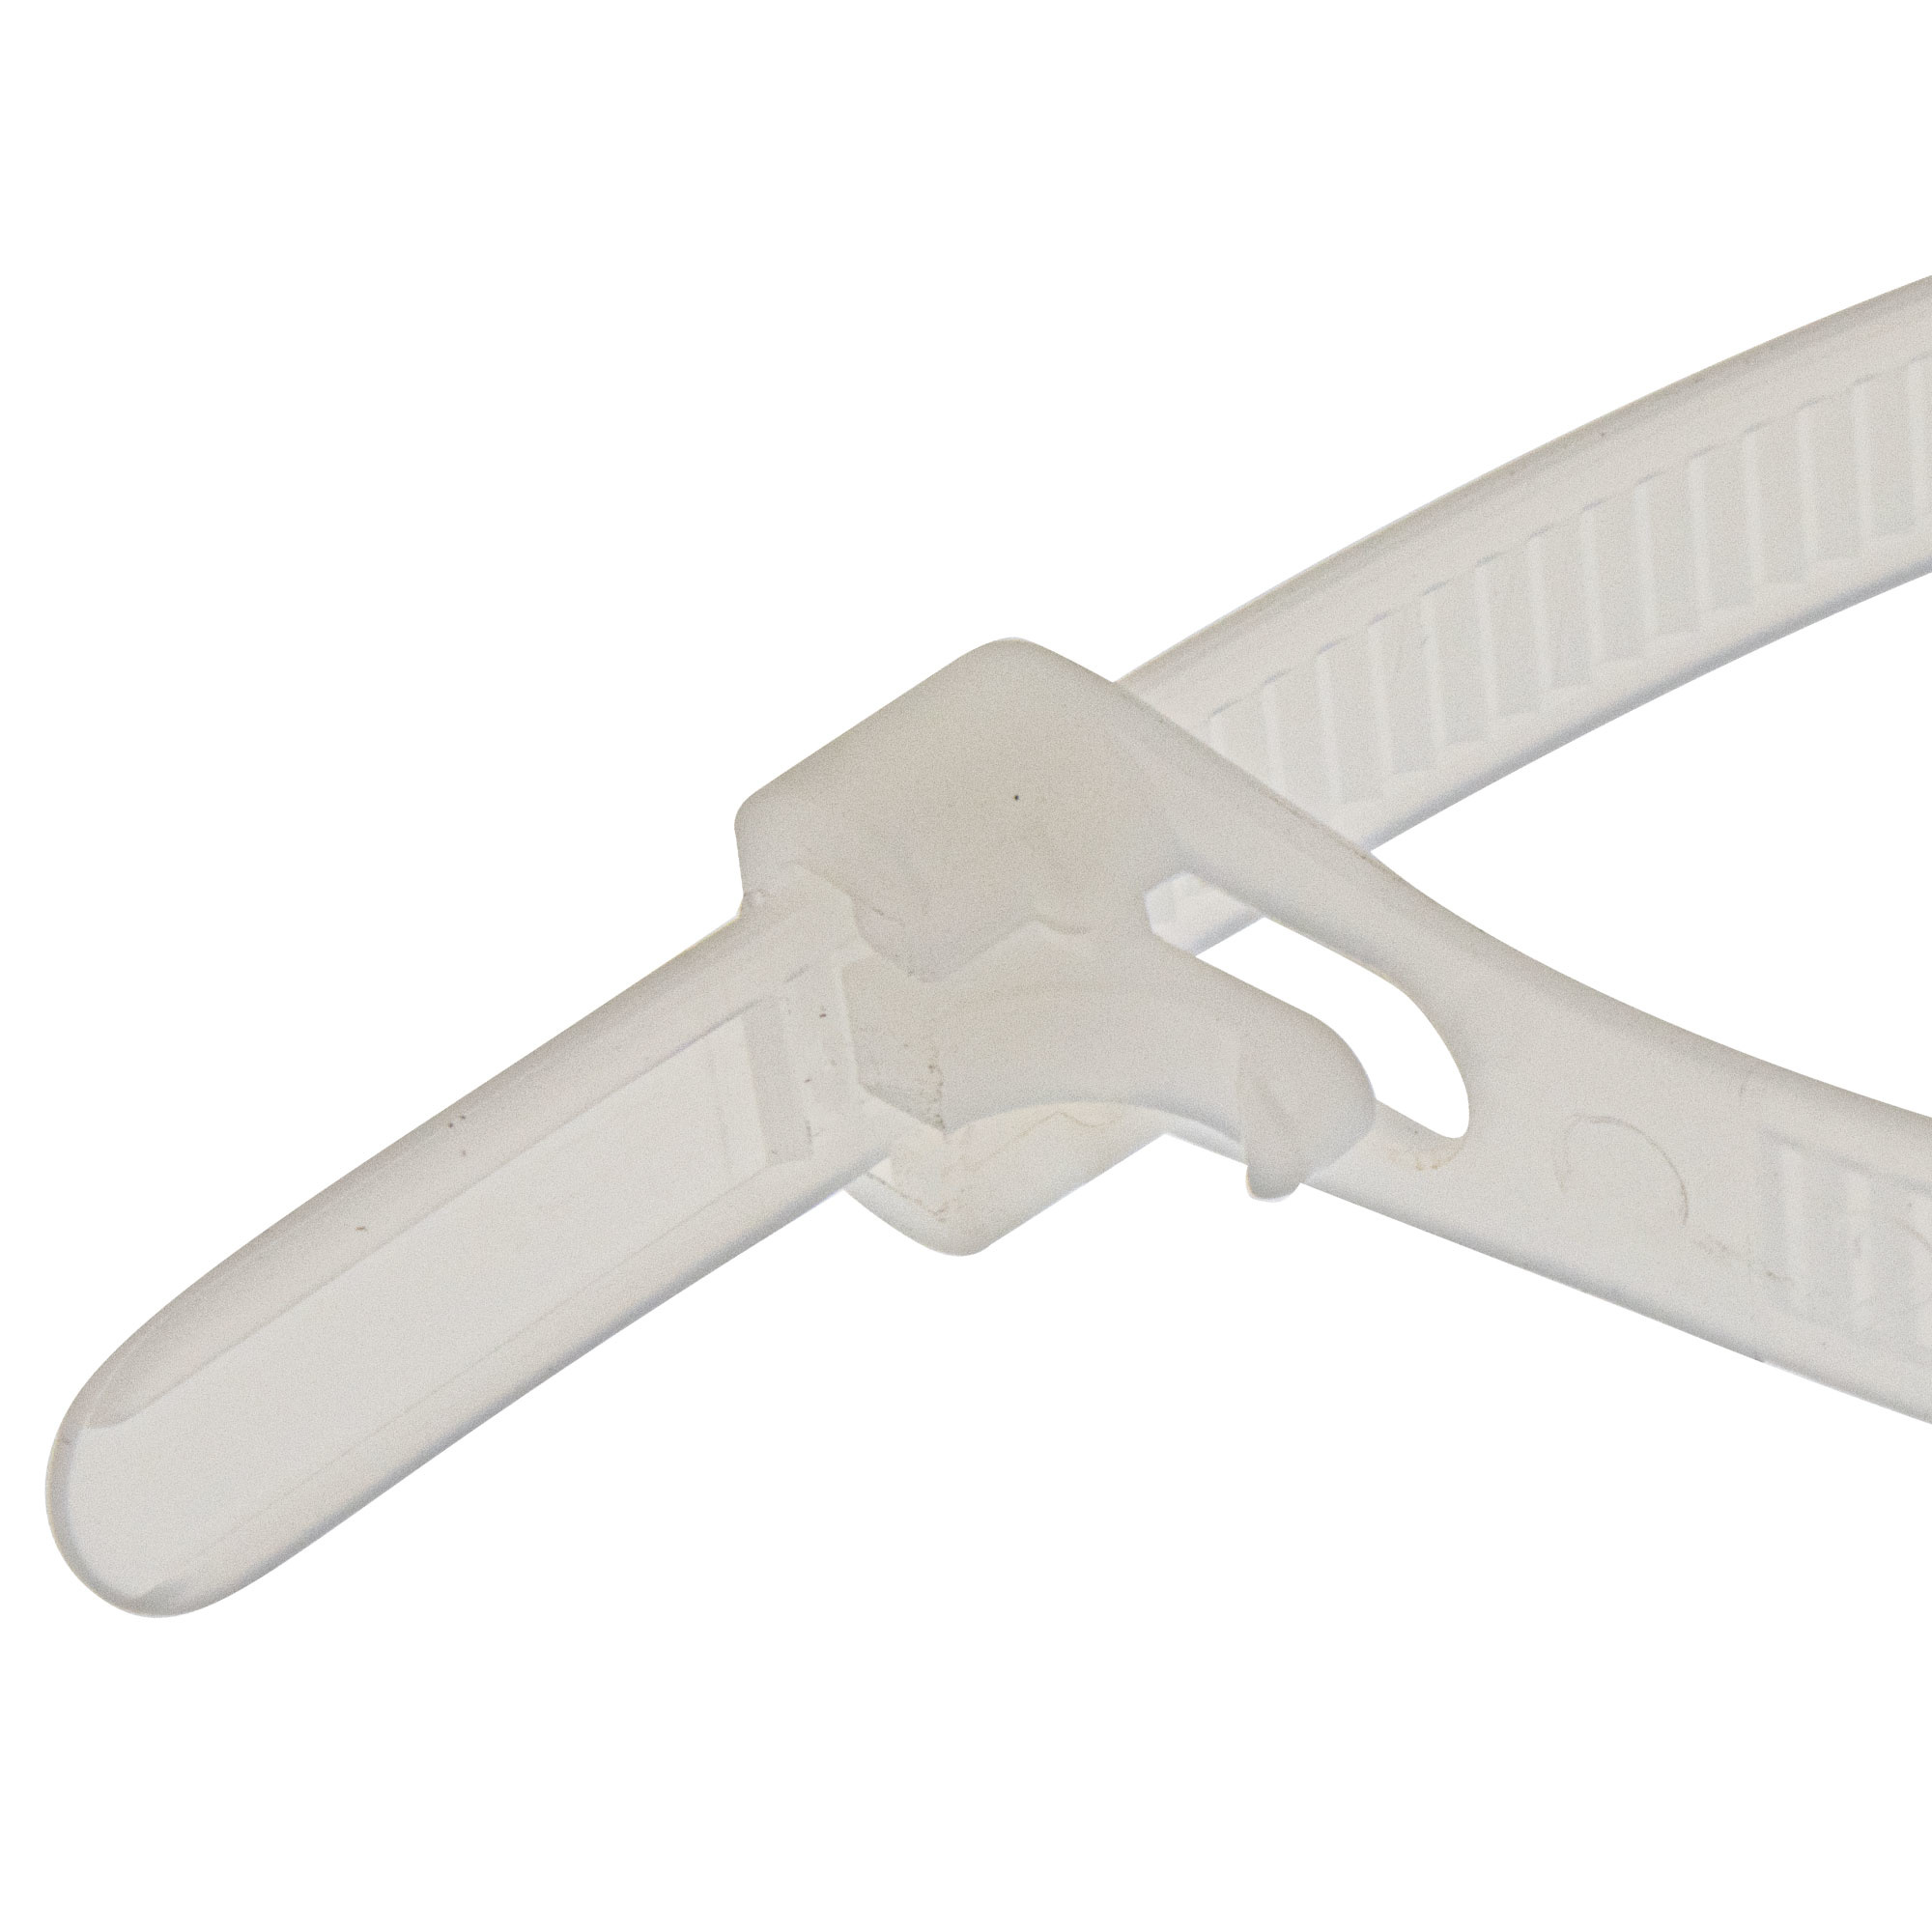 Cable tie re-use-able 300 x 4,8mm, white, 100PCS